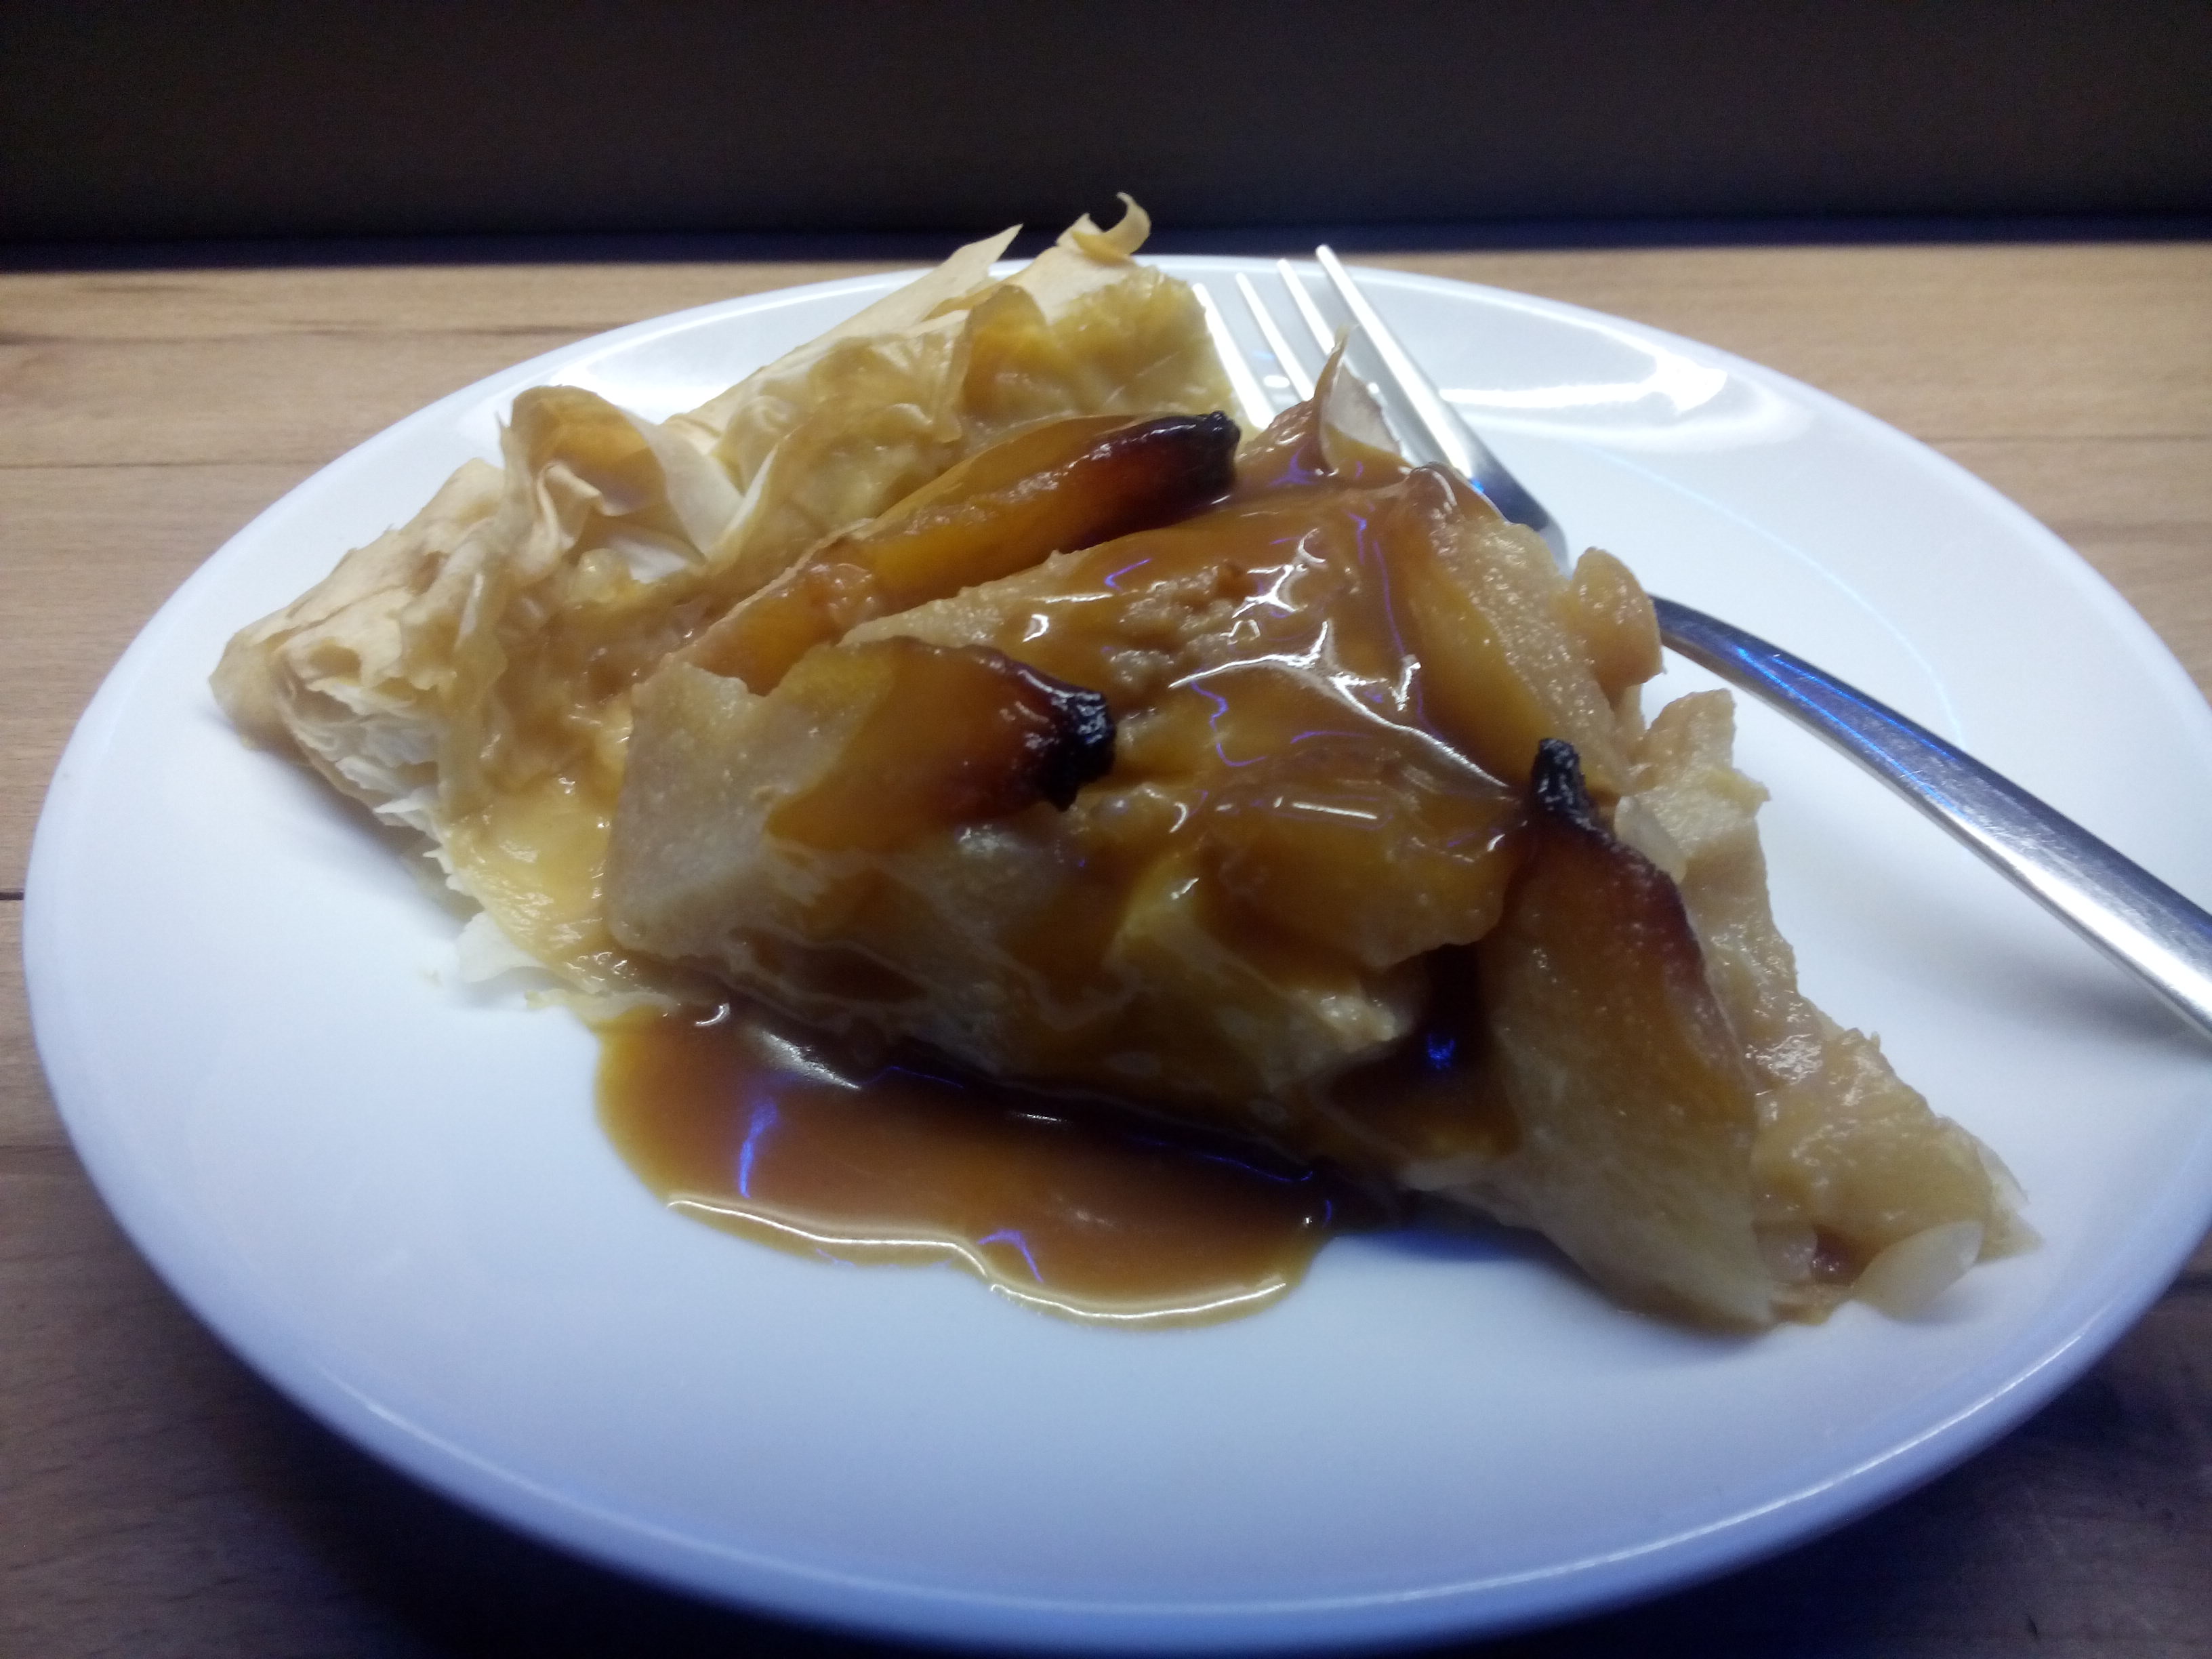 Flasky pastry tart on a white plate with a fork. The tart is full of pear and drizzled with shiny caramel sauce